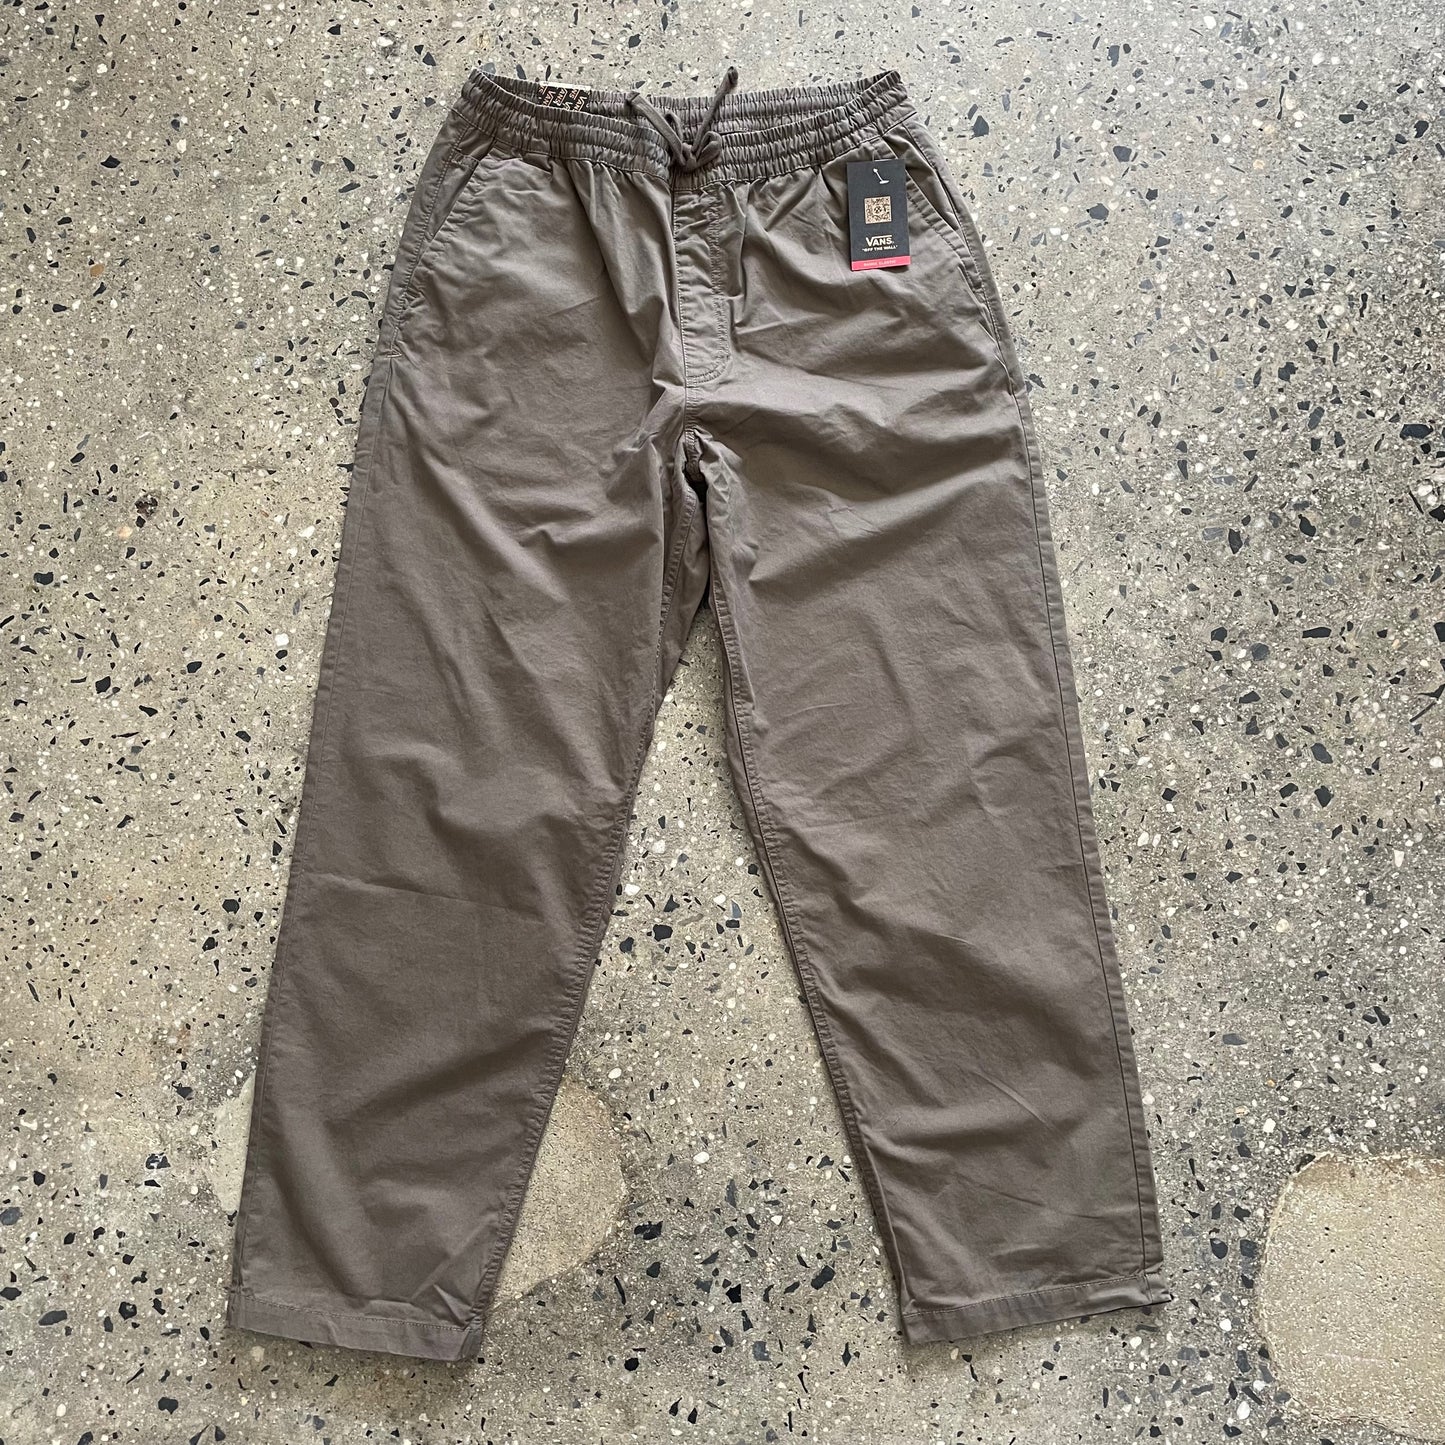 Vans Range Baggy Tapered Pant - Canteen